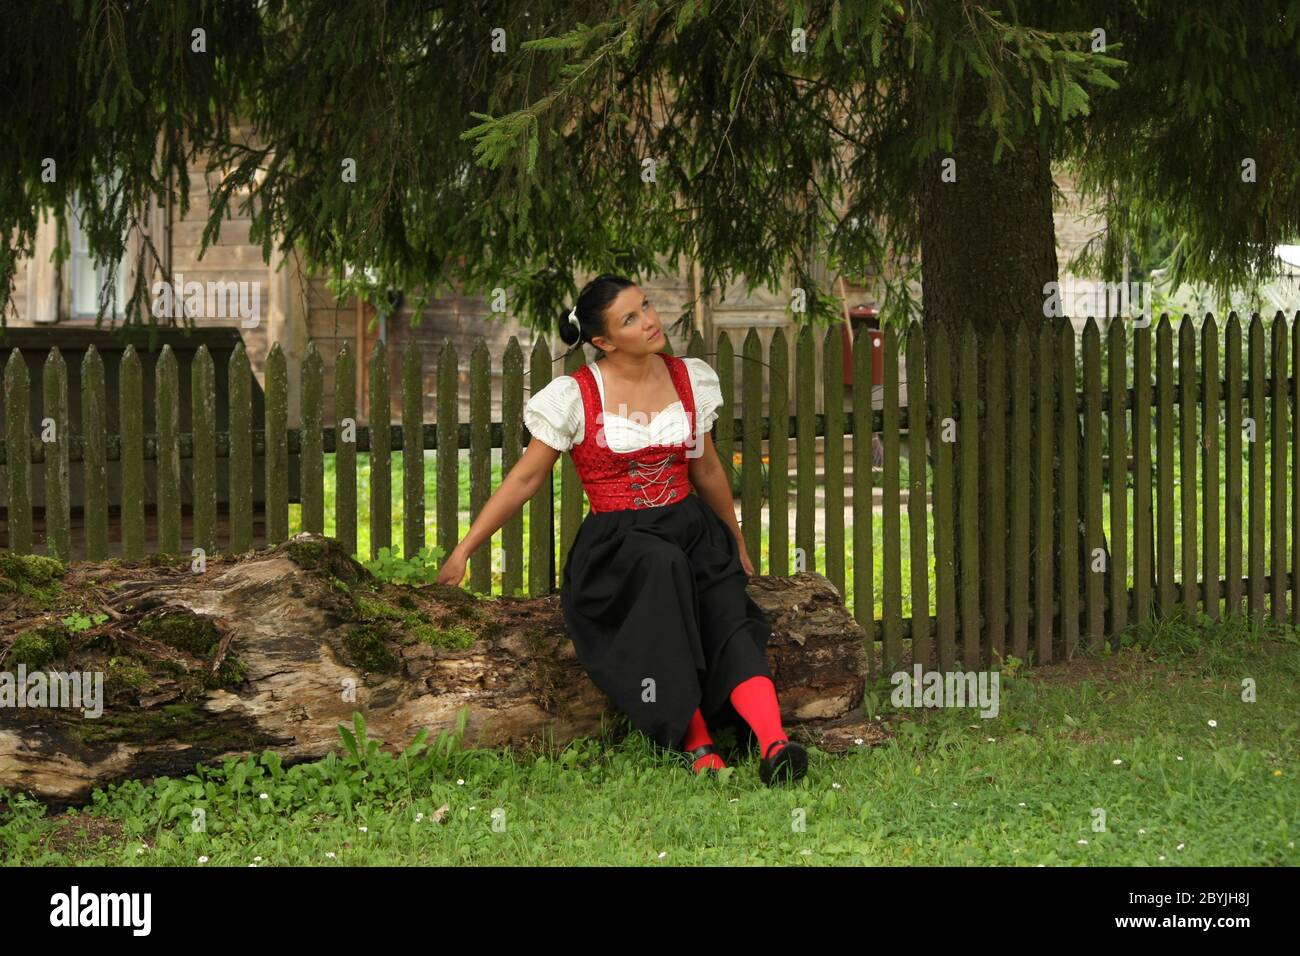 Girl in Austrian German traditional dress in countryside near tree and fence sitting Dirndl Stock Photo